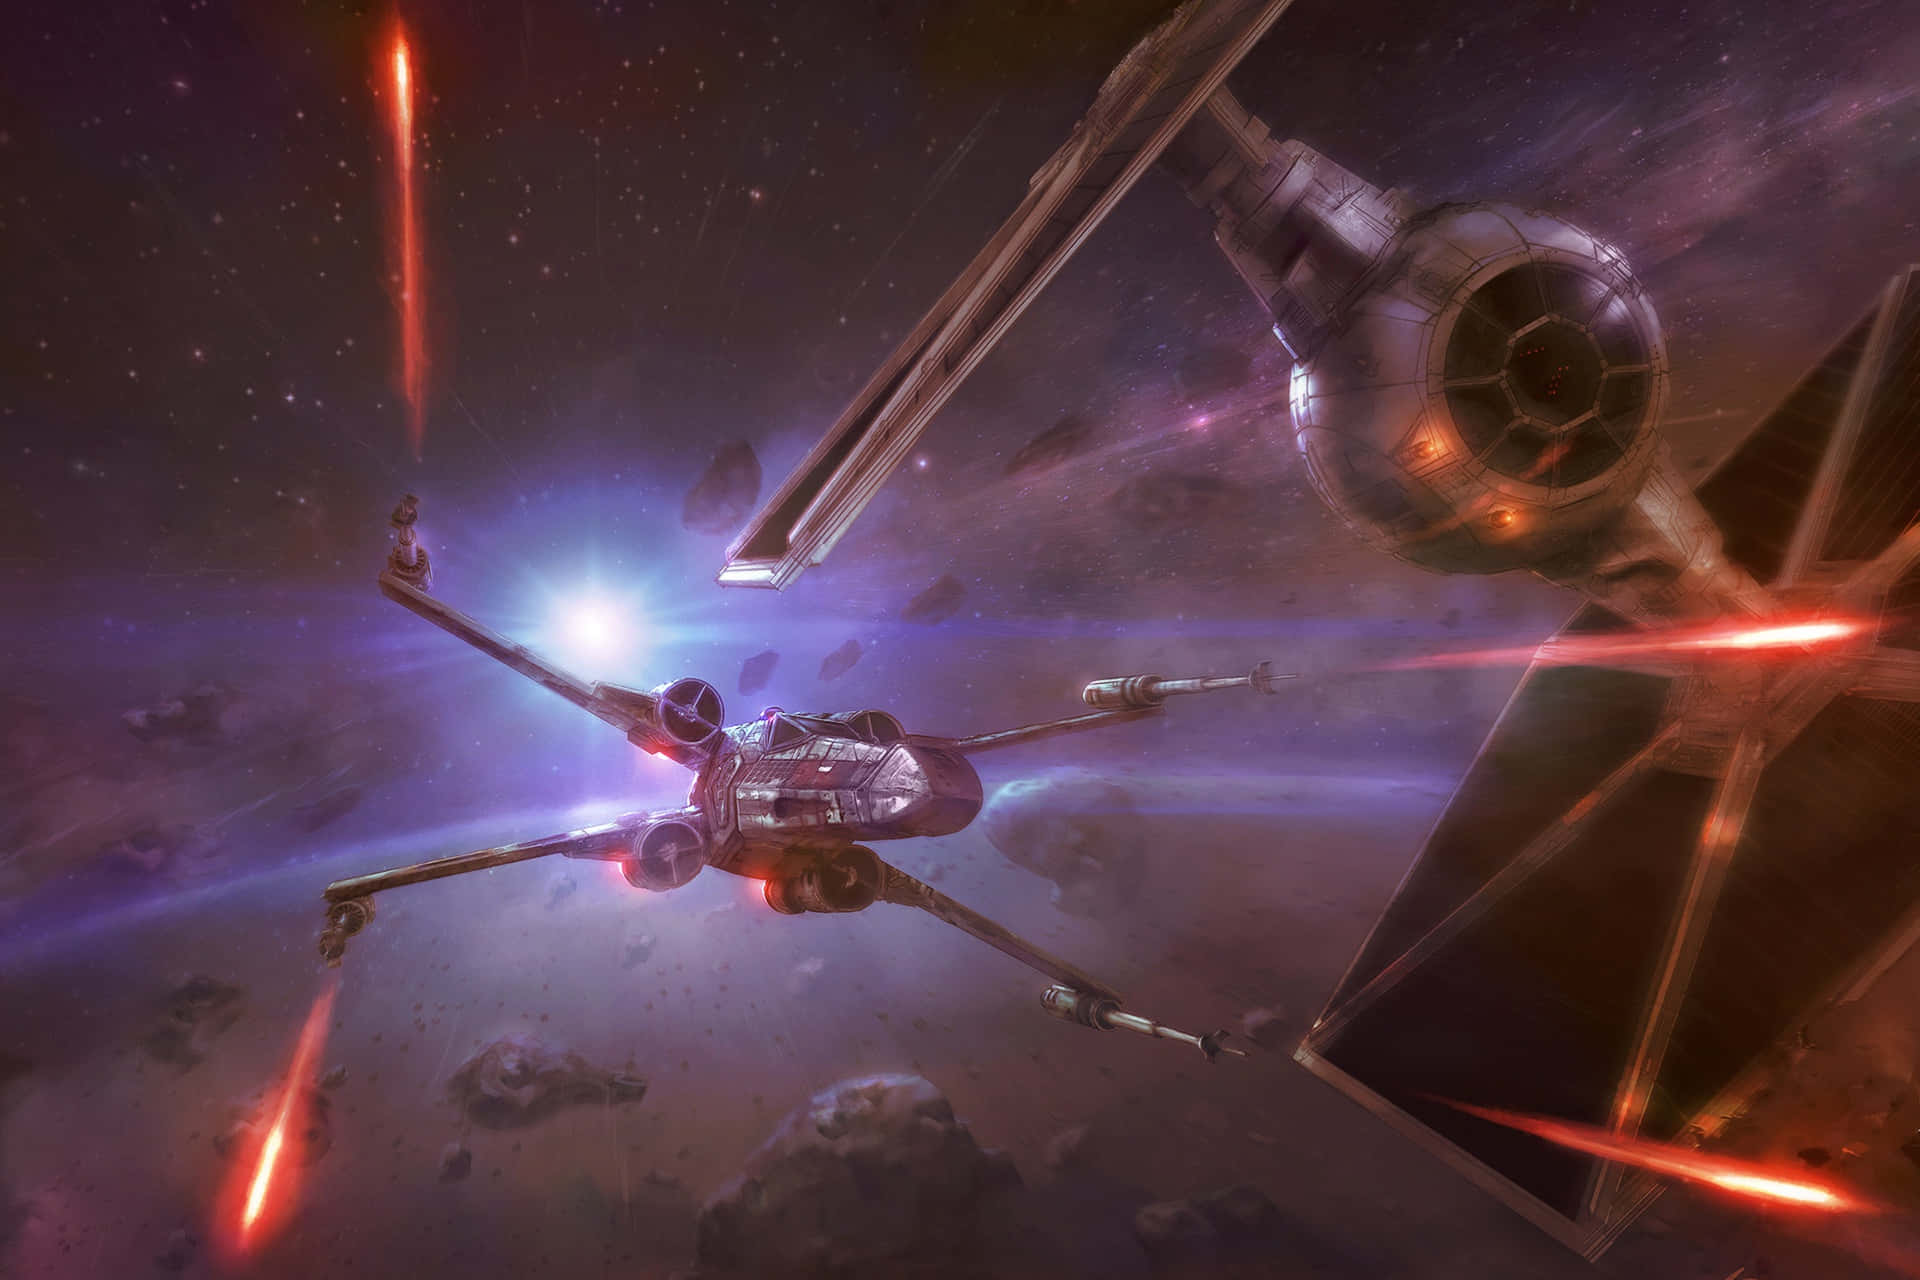 "The X-Wing Fighter, Ready for its Mission to Save the Galaxy" Wallpaper